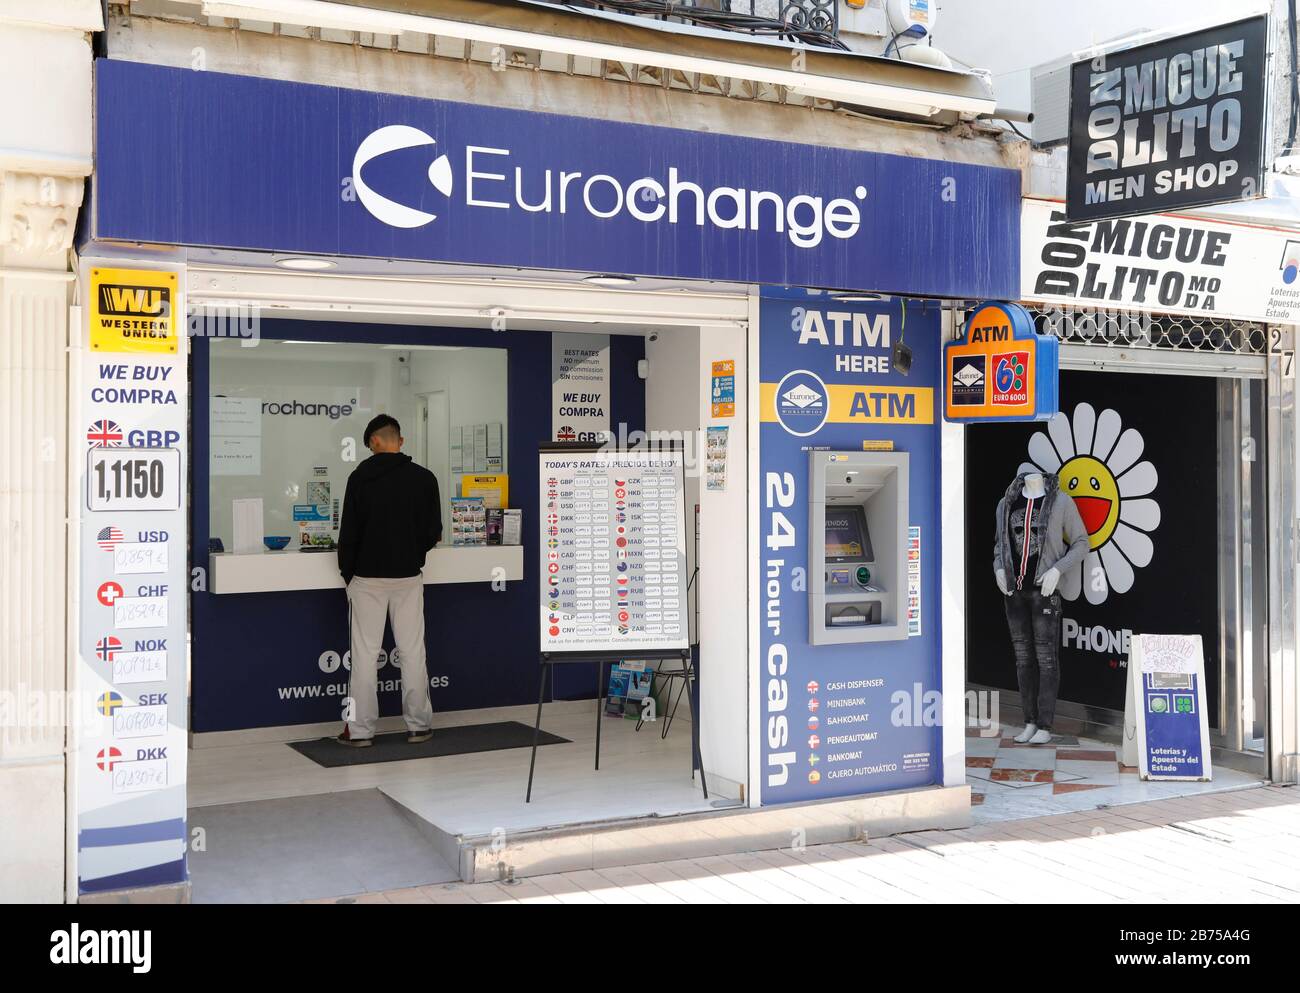 A man is standing at a money exchange office in Torremolinos, Spain on 13.02.2019. The possible brexite has considerable consequences for the Spanish economy.15 million British holidaymakers came to Spain last year and spent 14 billion euros. With a pound that depreciates sharply, they will spend less money, or seek targets in their own kingdom. The same applies to the 760,000 British citizens who have a second residence in Spain. [automated translation] Stock Photo